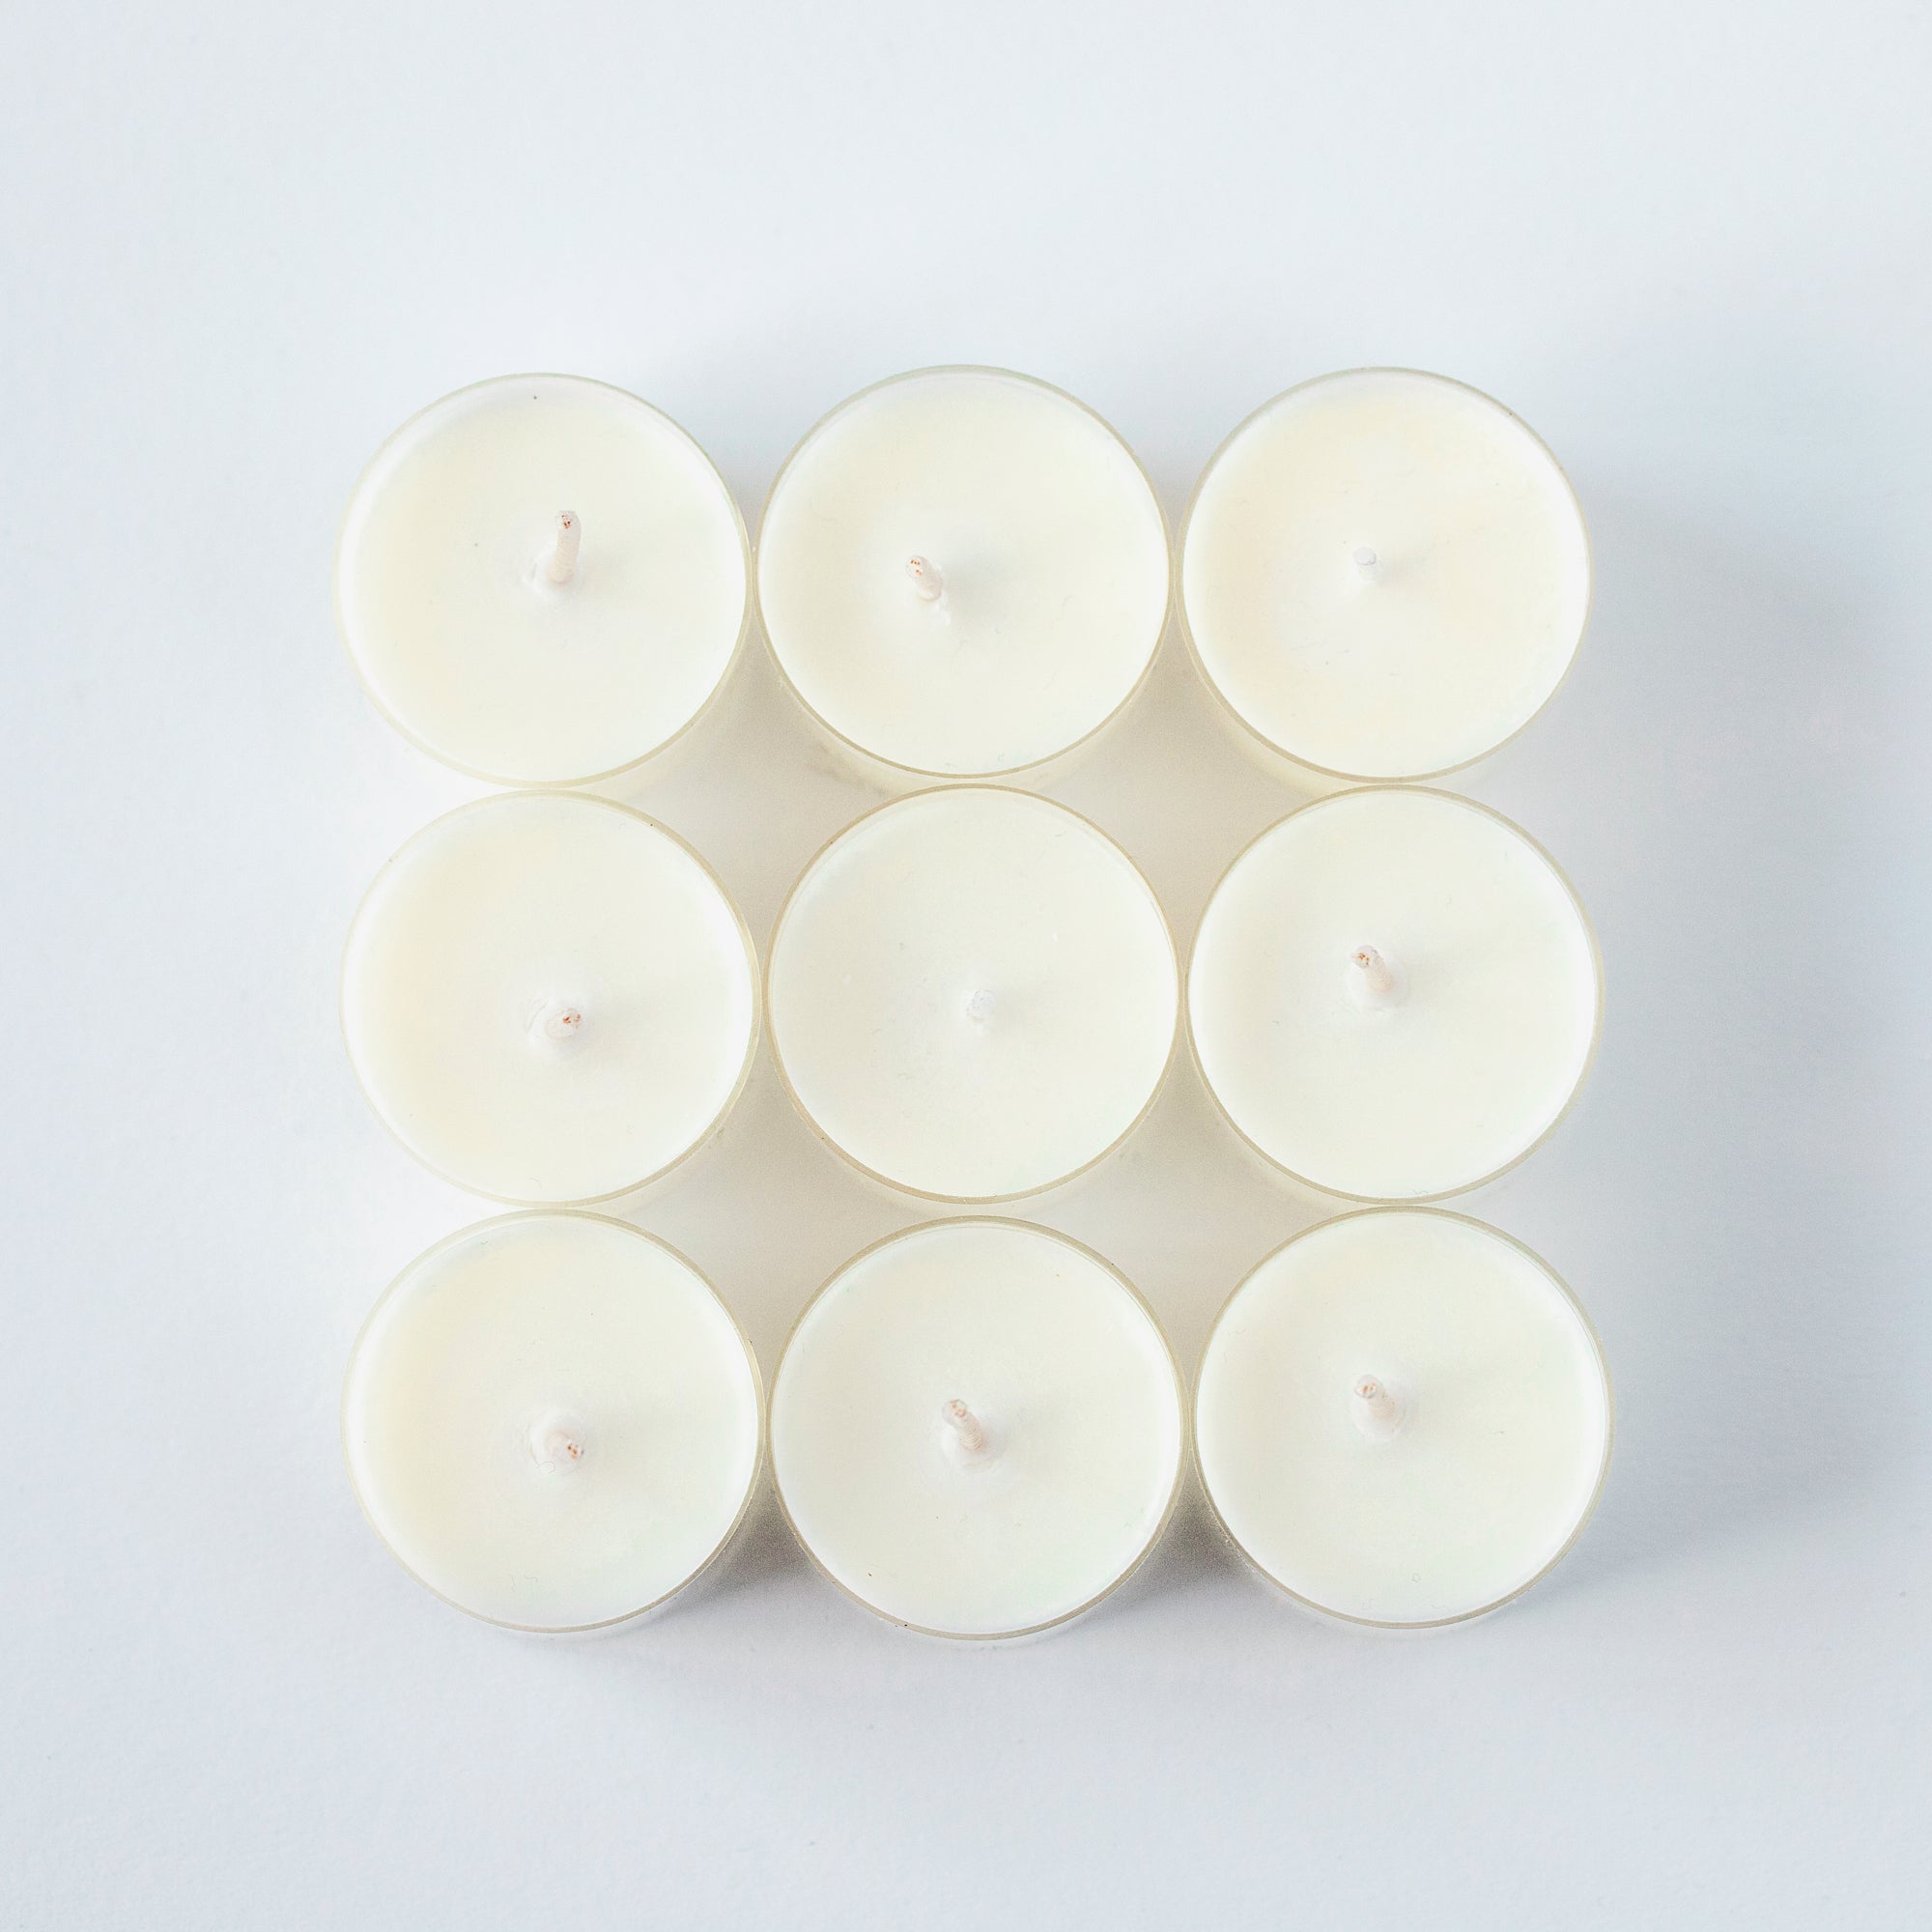 Tea Candle Set of 9 - Scented Coconut Wax Tea Candles